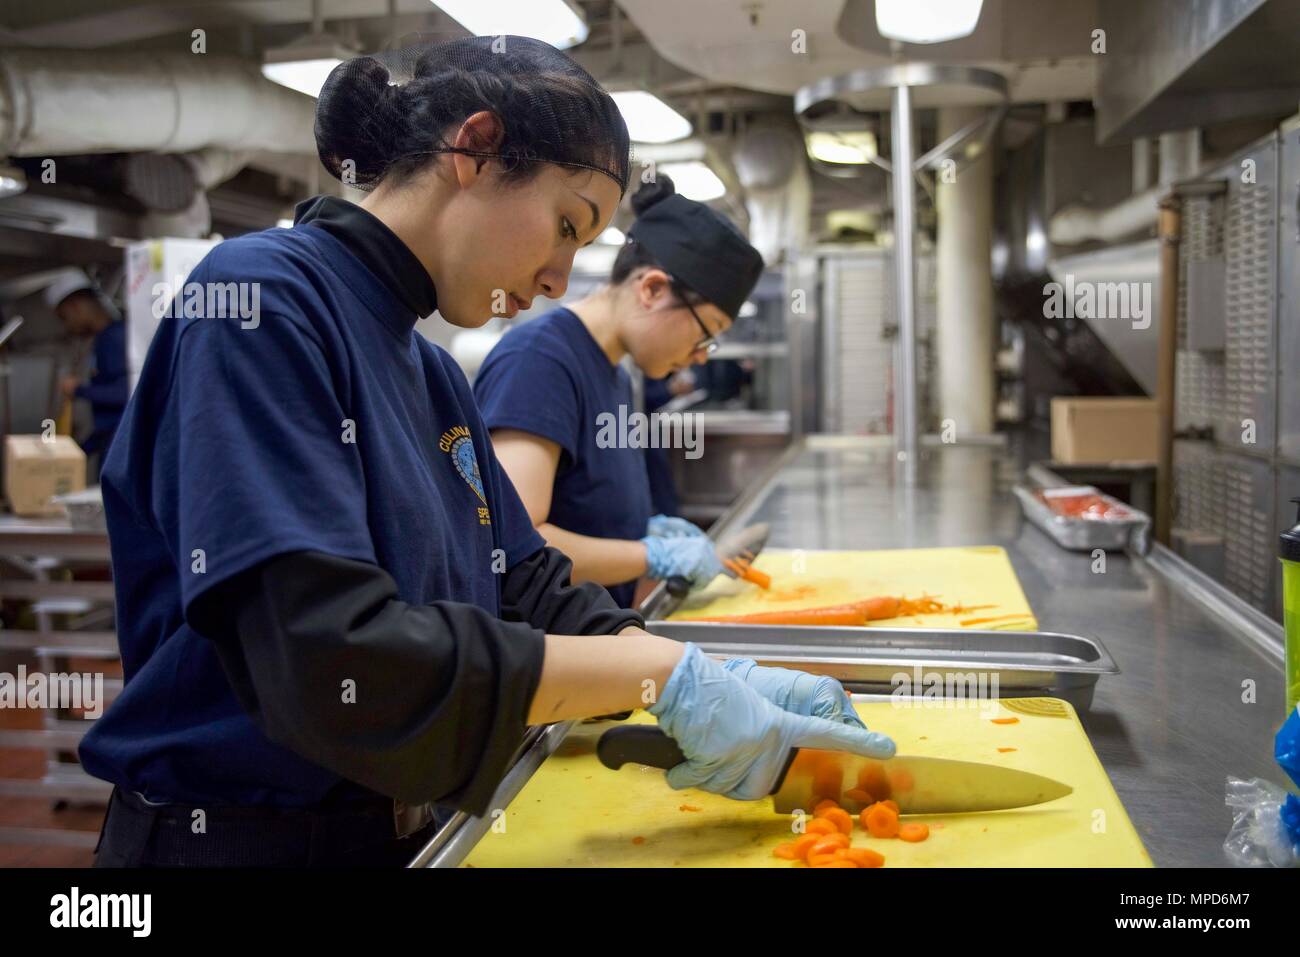 170204-N-IE397-014  NORFOLK, Va. (Feb. 4, 2017) Culinary Specialist Seaman Yecy Marty, left, and Culinary Specialist Seaman Hien Nguyen, from Charlotte, N.C., prepare carrots for the salad bar in the forward galley of the aircraft carrier USS Dwight D. Eisenhower (CVN 69) (Ike). Ike is currently conducting aircraft carrier qualifications during the Sustainment Phase of the Optimized Fleet Response Plan (OFRP). (U.S. Navy photo by Mass Communication Specialist 3rd Class Christopher A. Michaels) Stock Photo